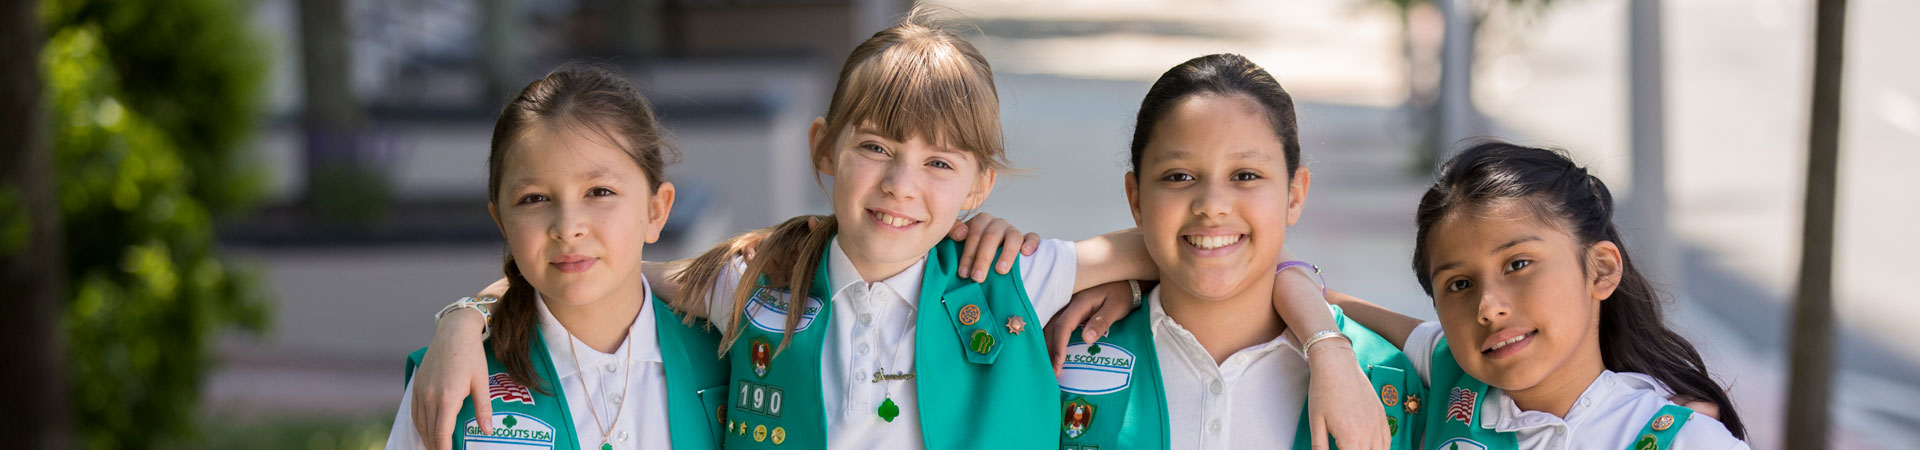  Four Girl Scouts wearing matching white shirts and green vests embellished with various pins and badges. They are standing outdoors with their arms around each other's shoulders.  